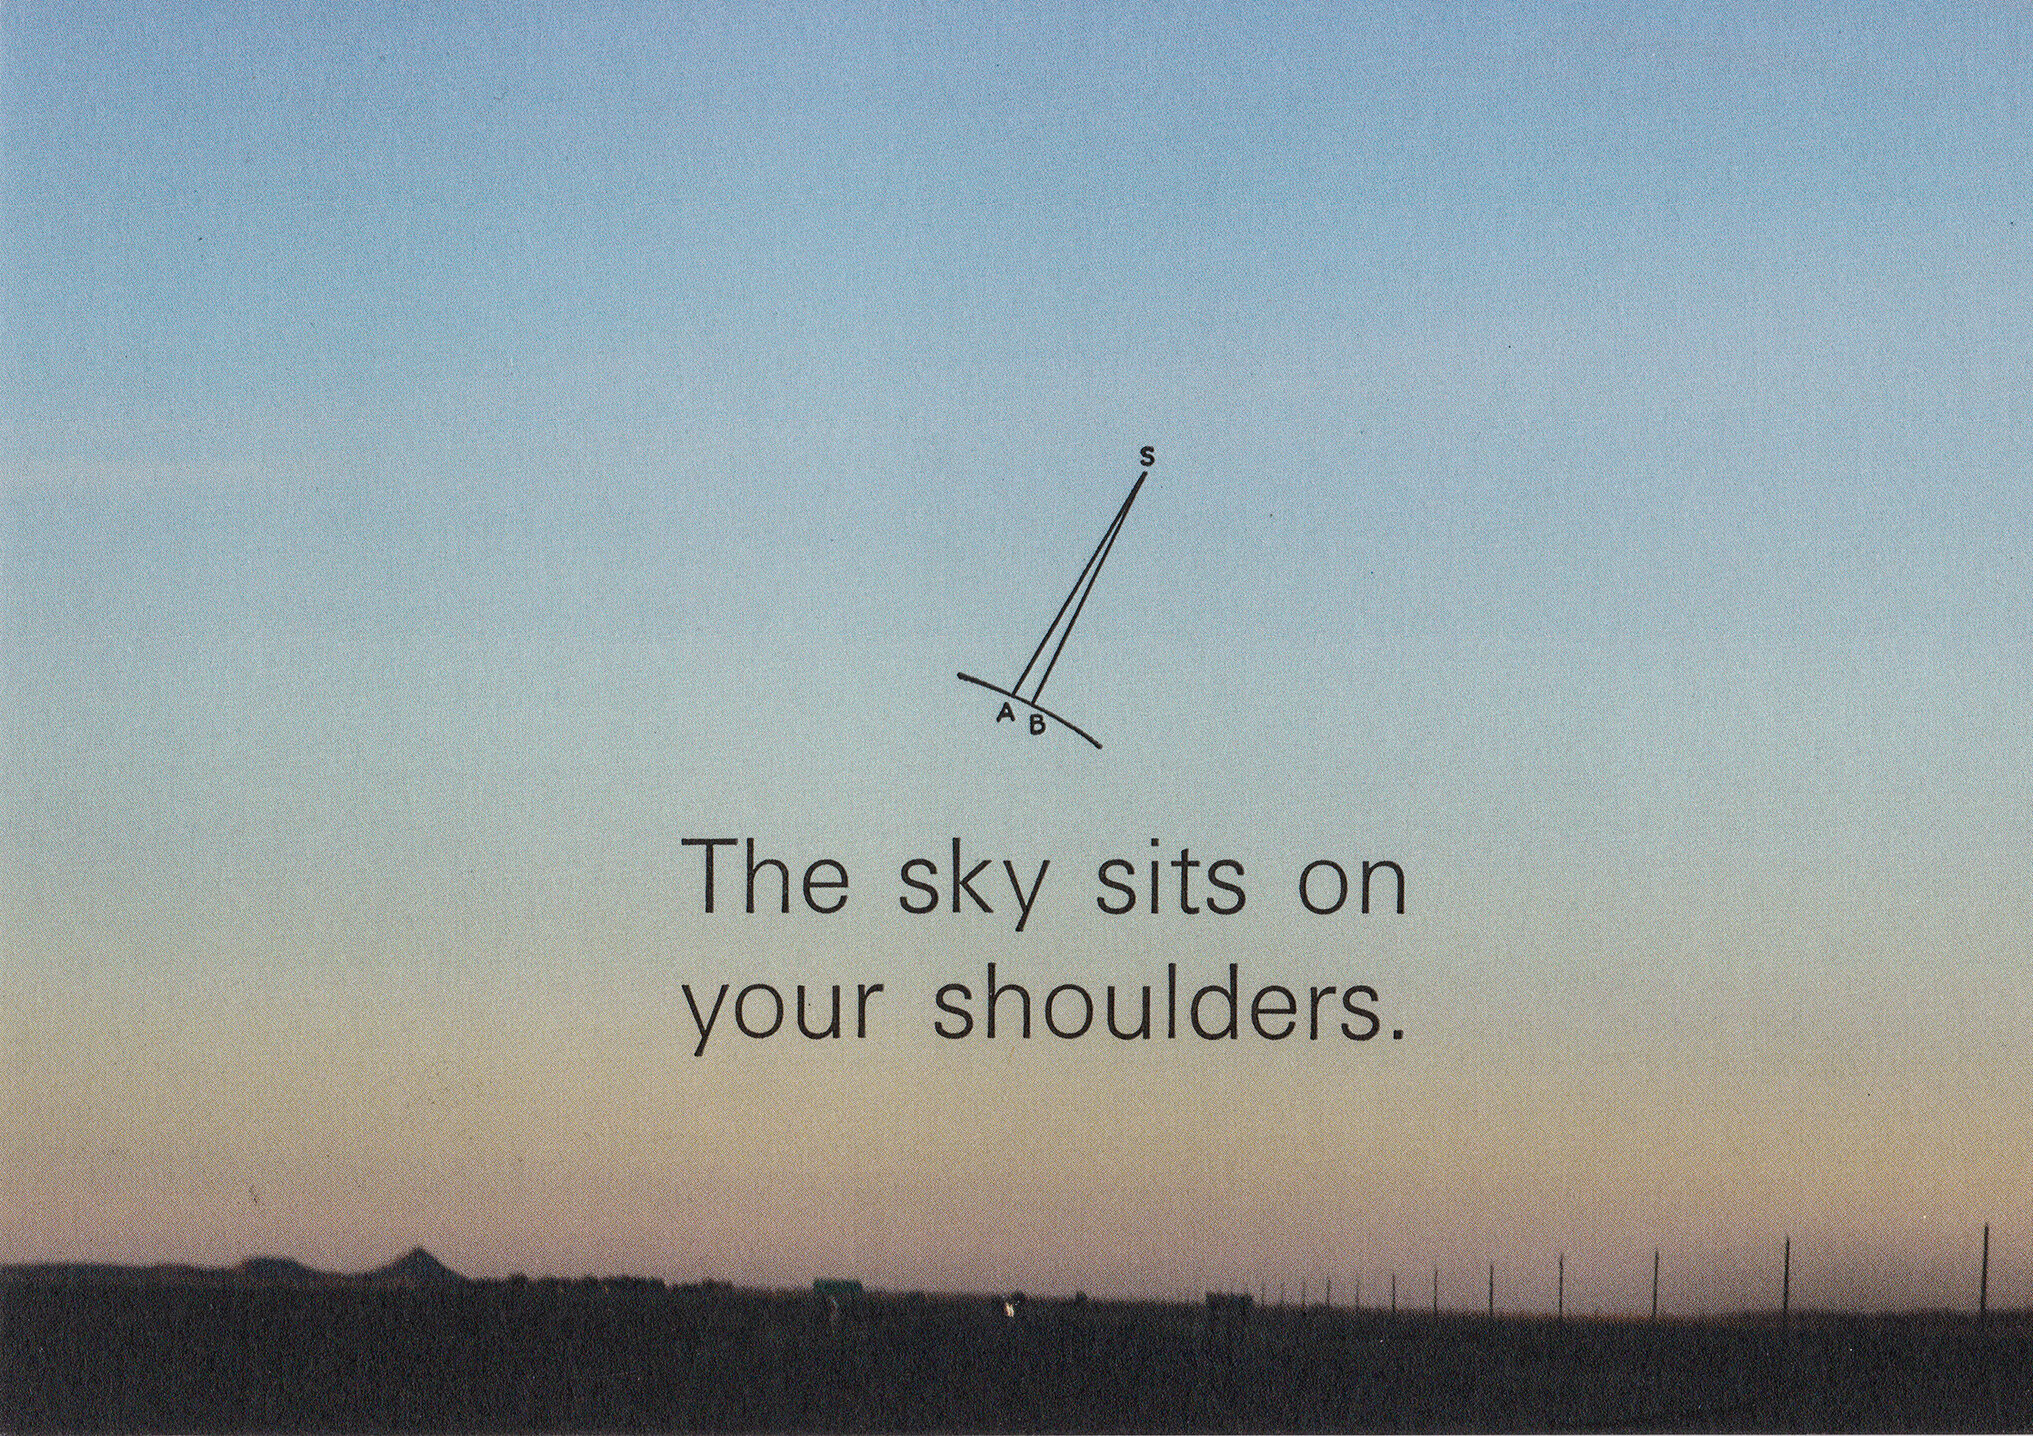 The sky sits on your shoulders.